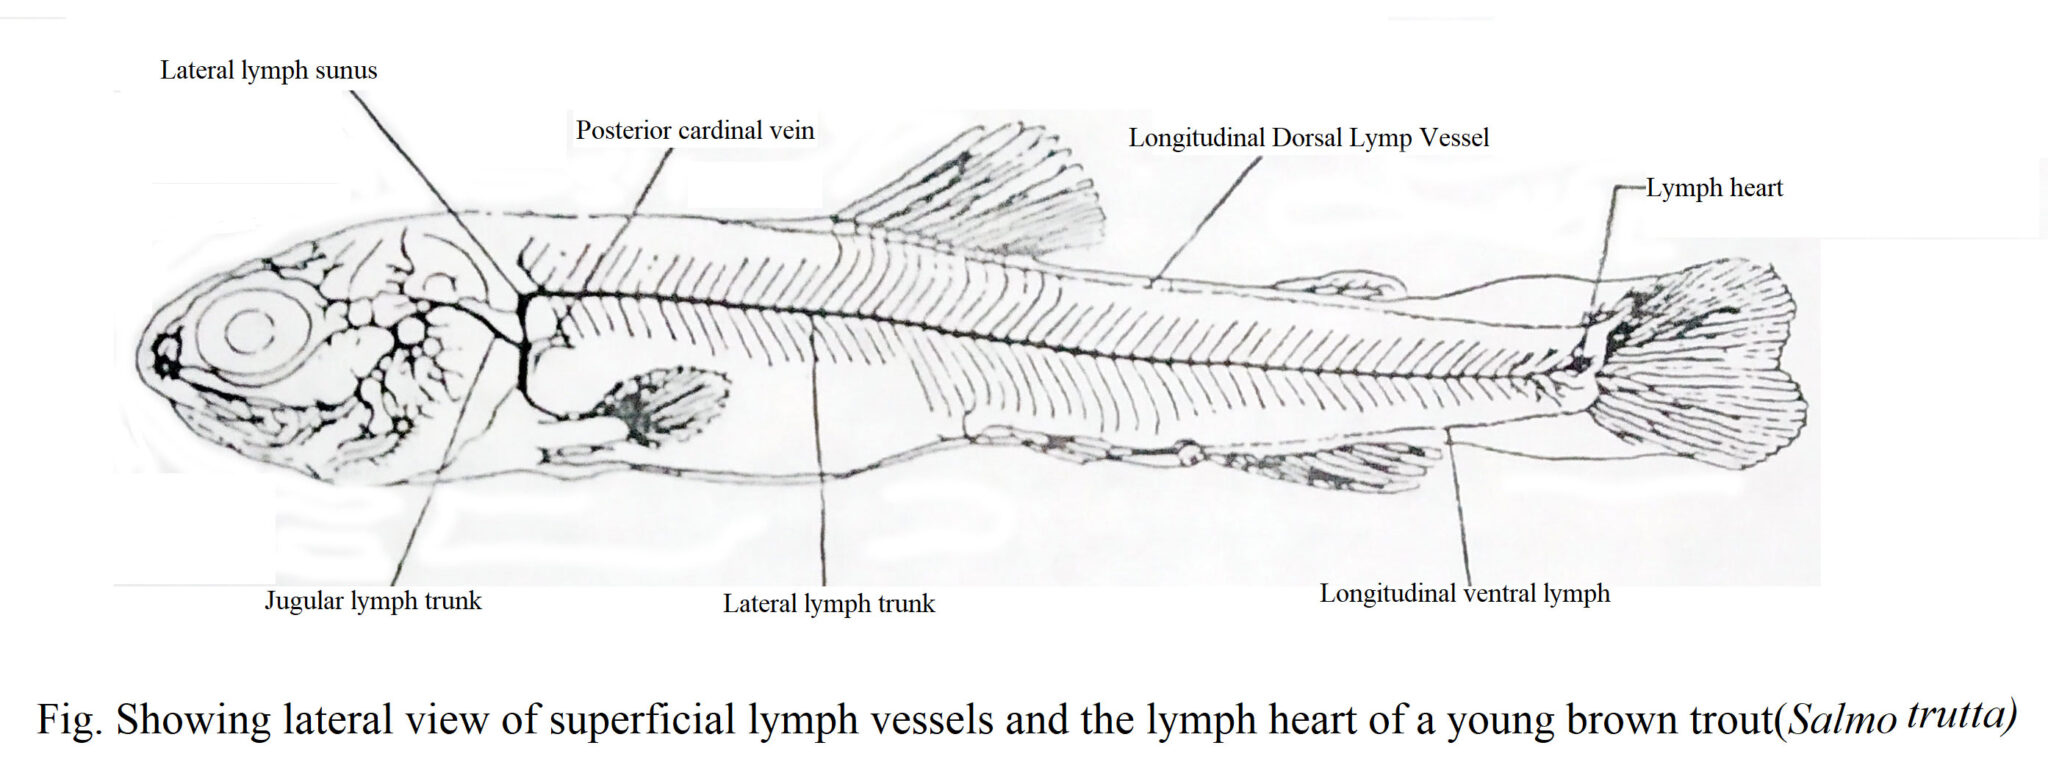 Blood Circulatory System of Fishes | Biology EduCare